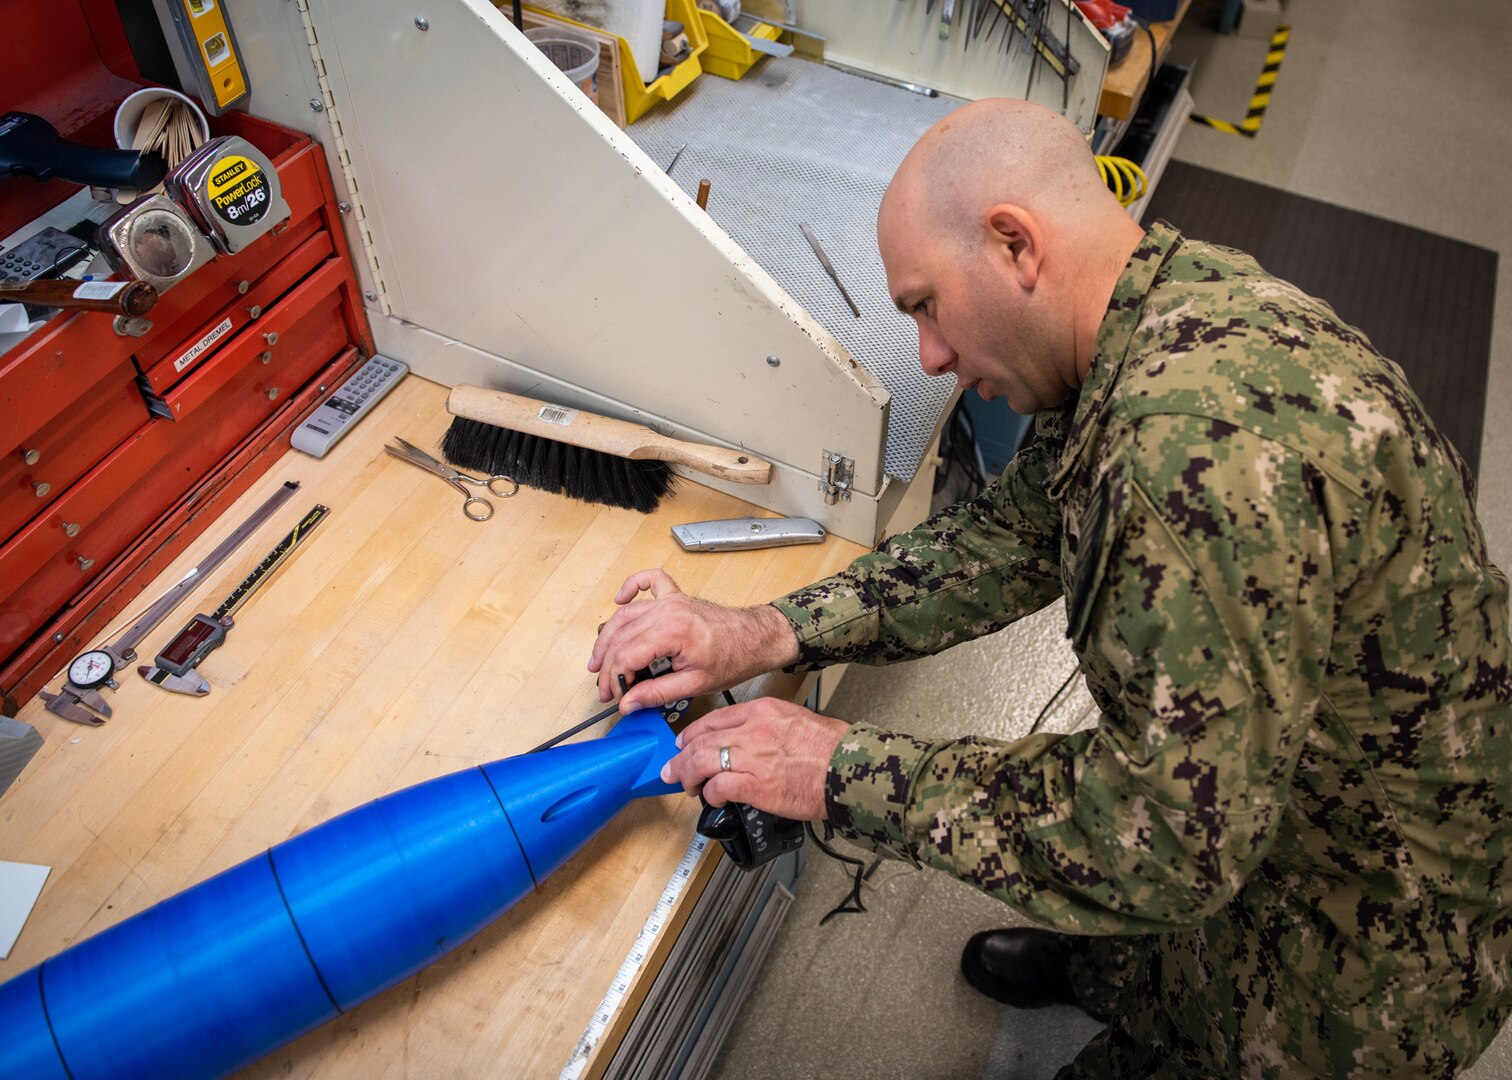 Lt. Brian Adornato, Engineering Duty Officer Reservist assigned to SurgeMain Atlanta, attaches the aft section of the unmanned underwater vehicle prototype to the hull. This process allows the whole craft to stay together as one piece and become watertight.